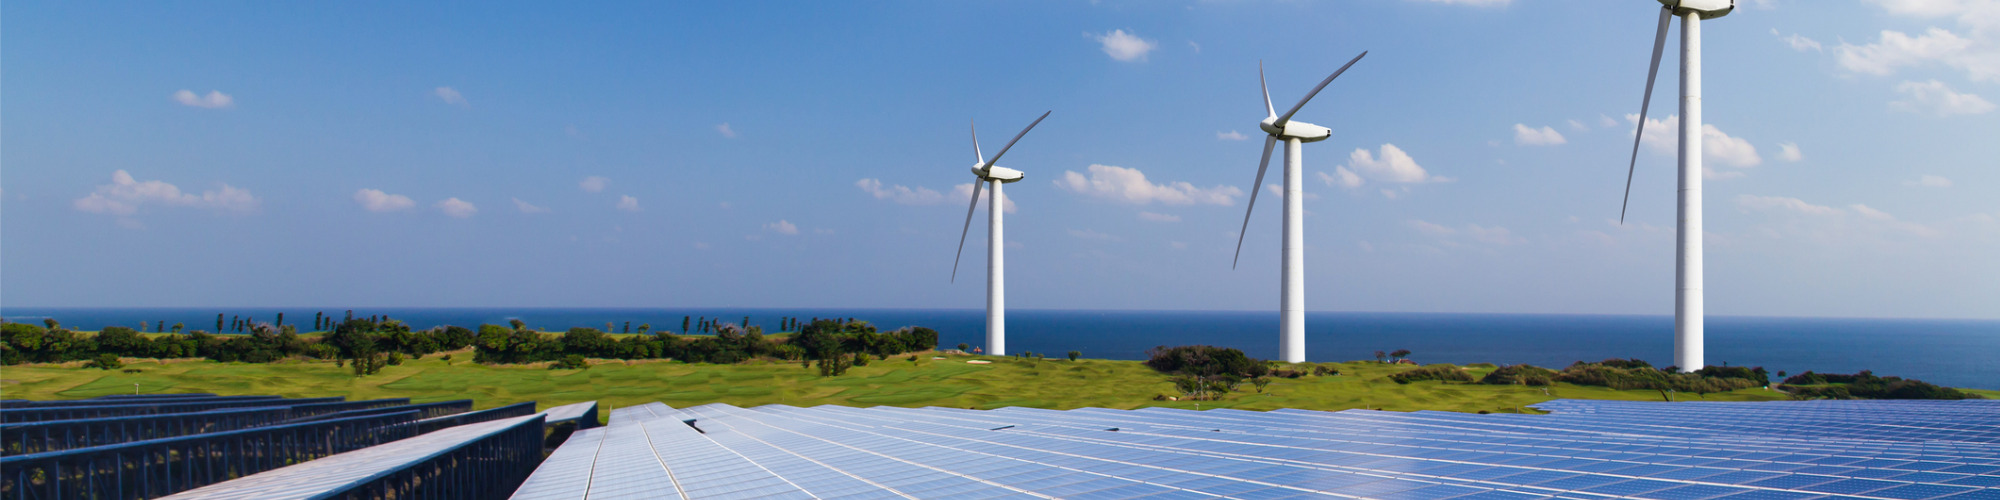 Option to Lease Agreements for Renewable Projects - For Landowners in Scotland